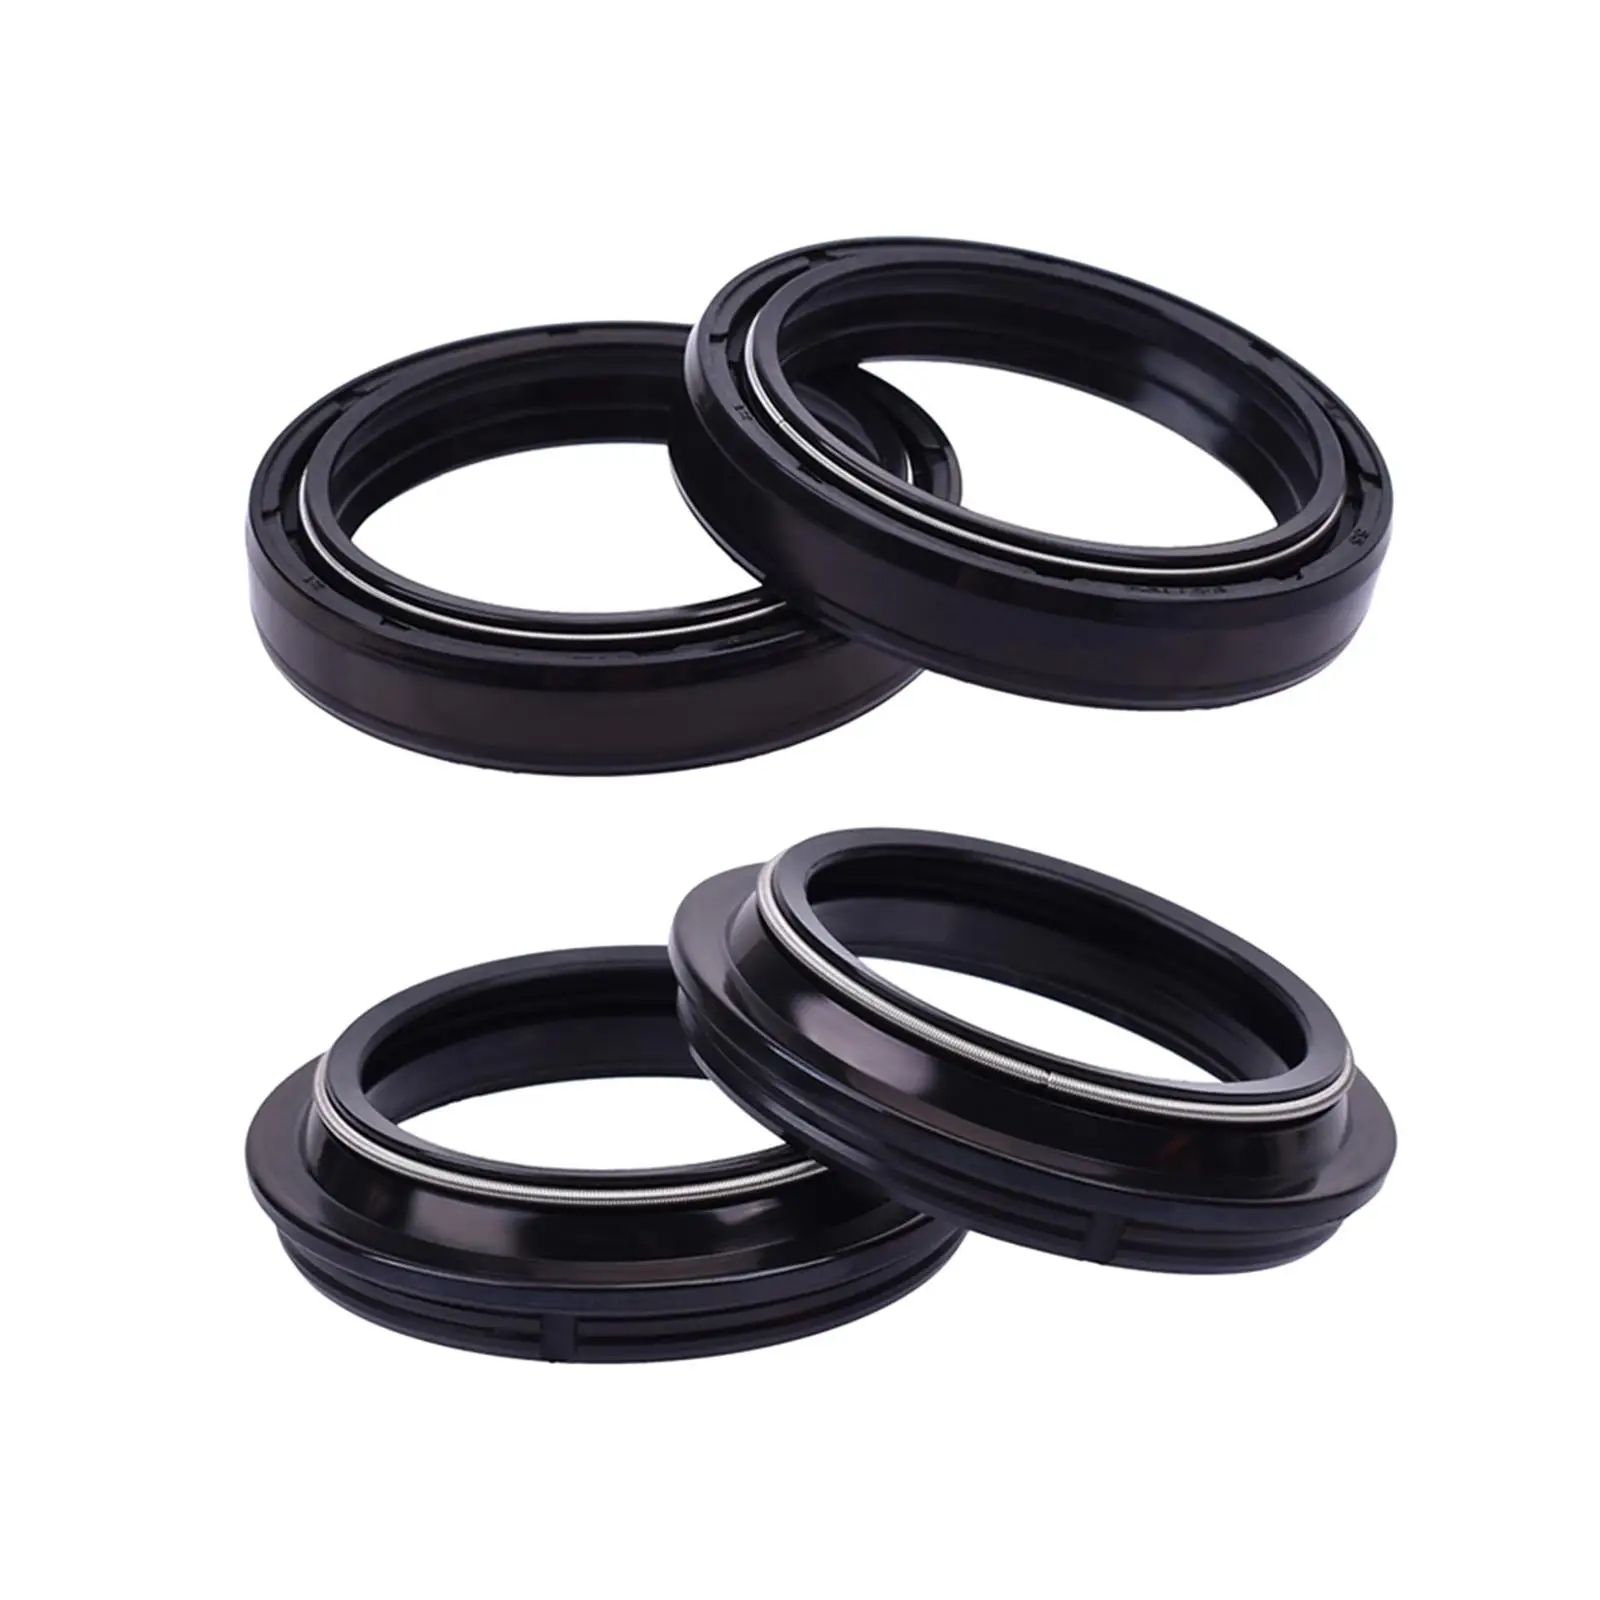 Fork Seal and Dust Seal Kit 47x58x11mm for Honda CR250R Crf450x Enduro / Off